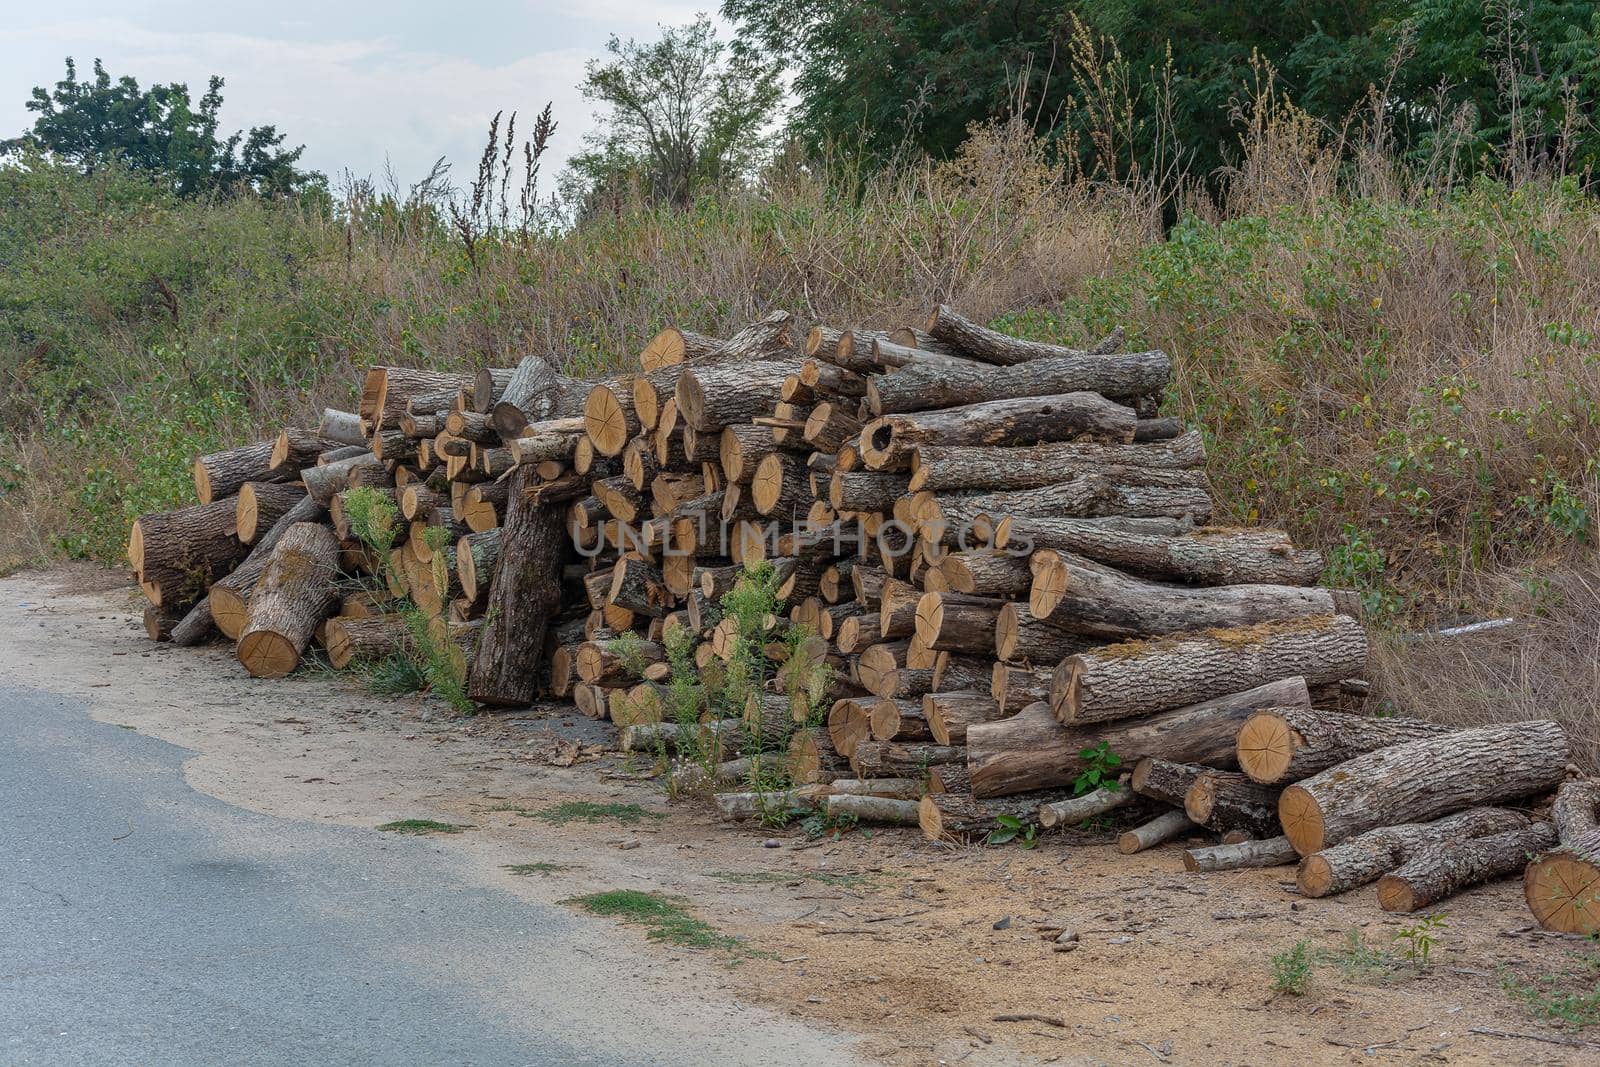 A woodpile is stacked near the road by Grommik